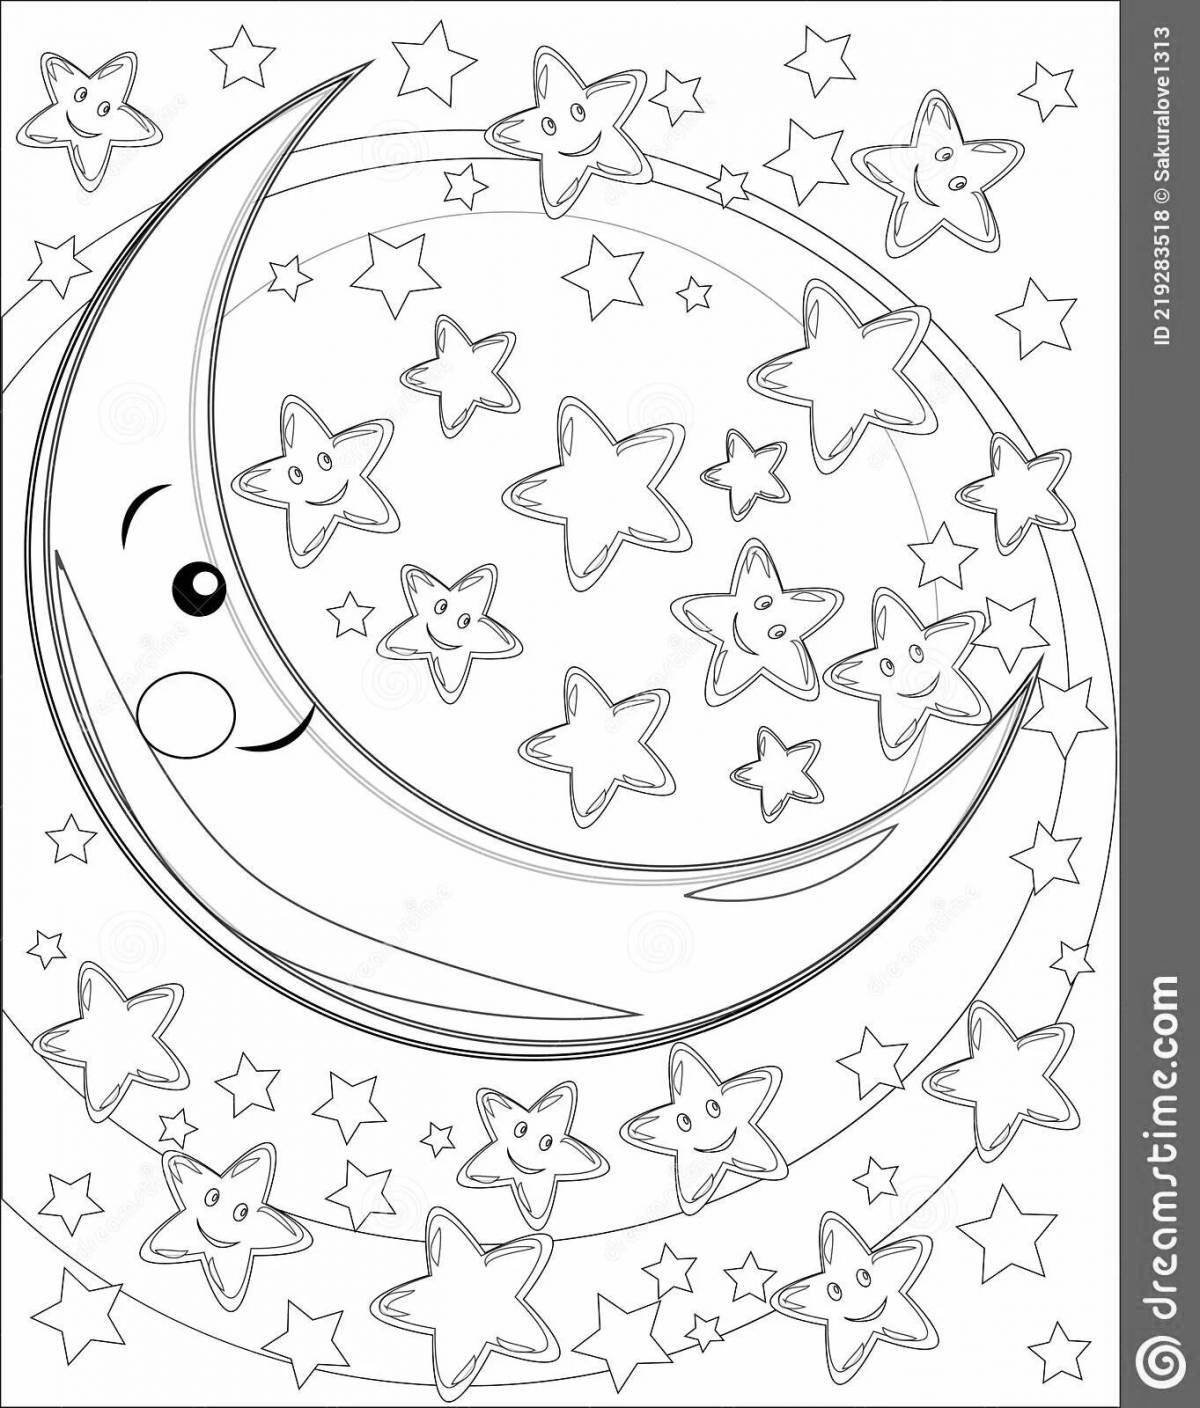 Fantastic moon and sun coloring book for kids